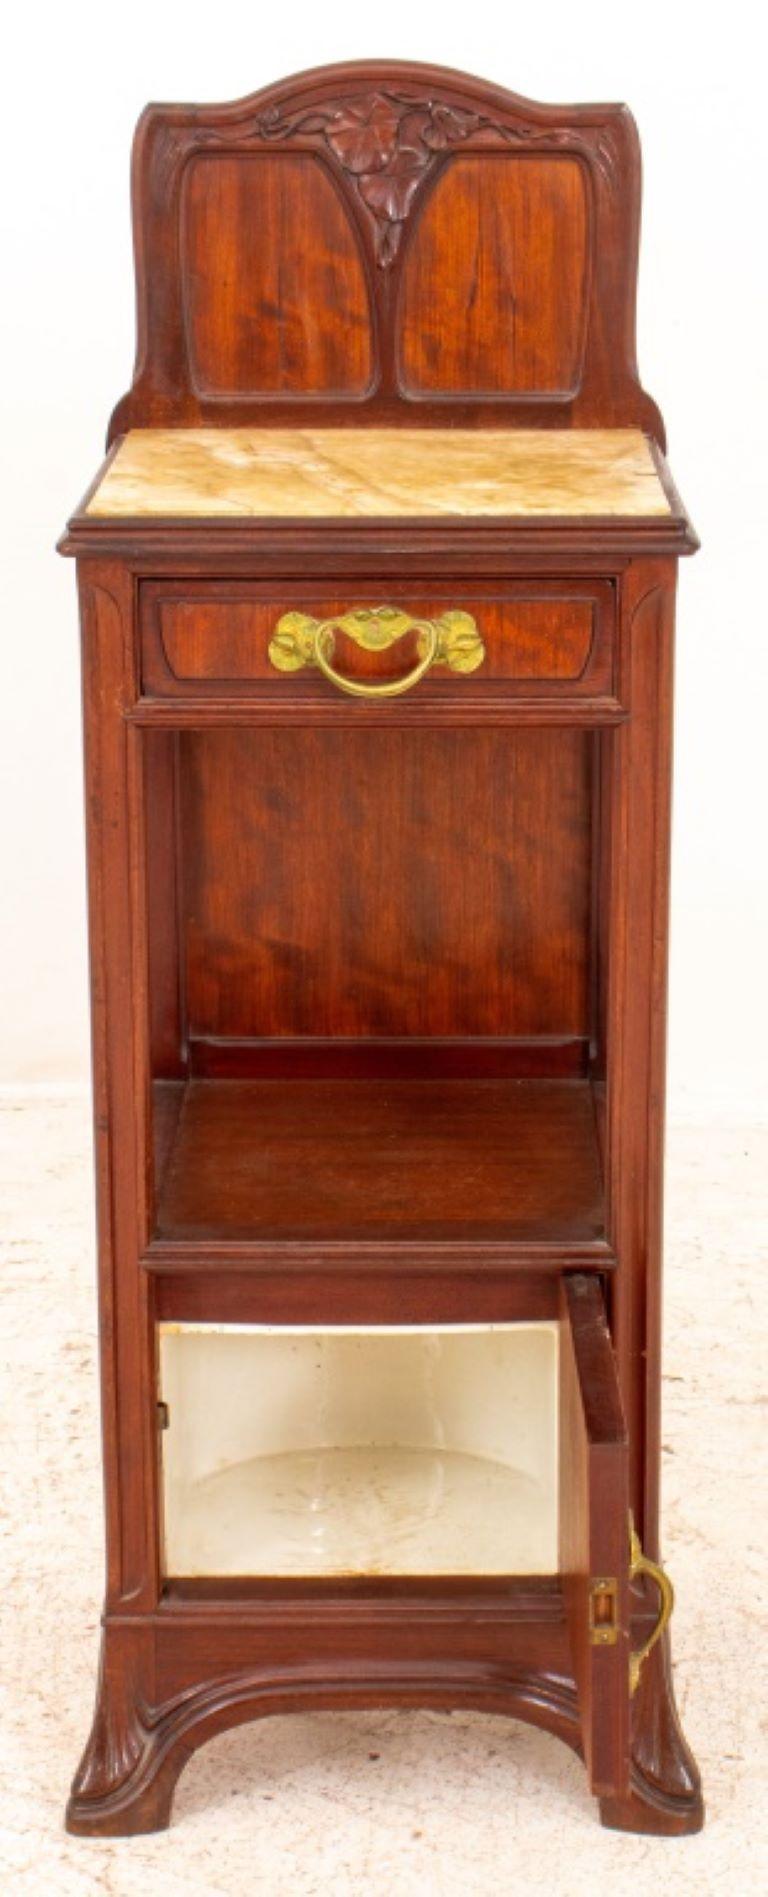 Louis Majorelle (French, 1859-1926) attributed Art Nouveau mahogany wood and stone wash stand, with undulating organic Art Nouveau ornamentation, the back splash with carved morning glory flowers over an inset onyx slab above a short drawer and a